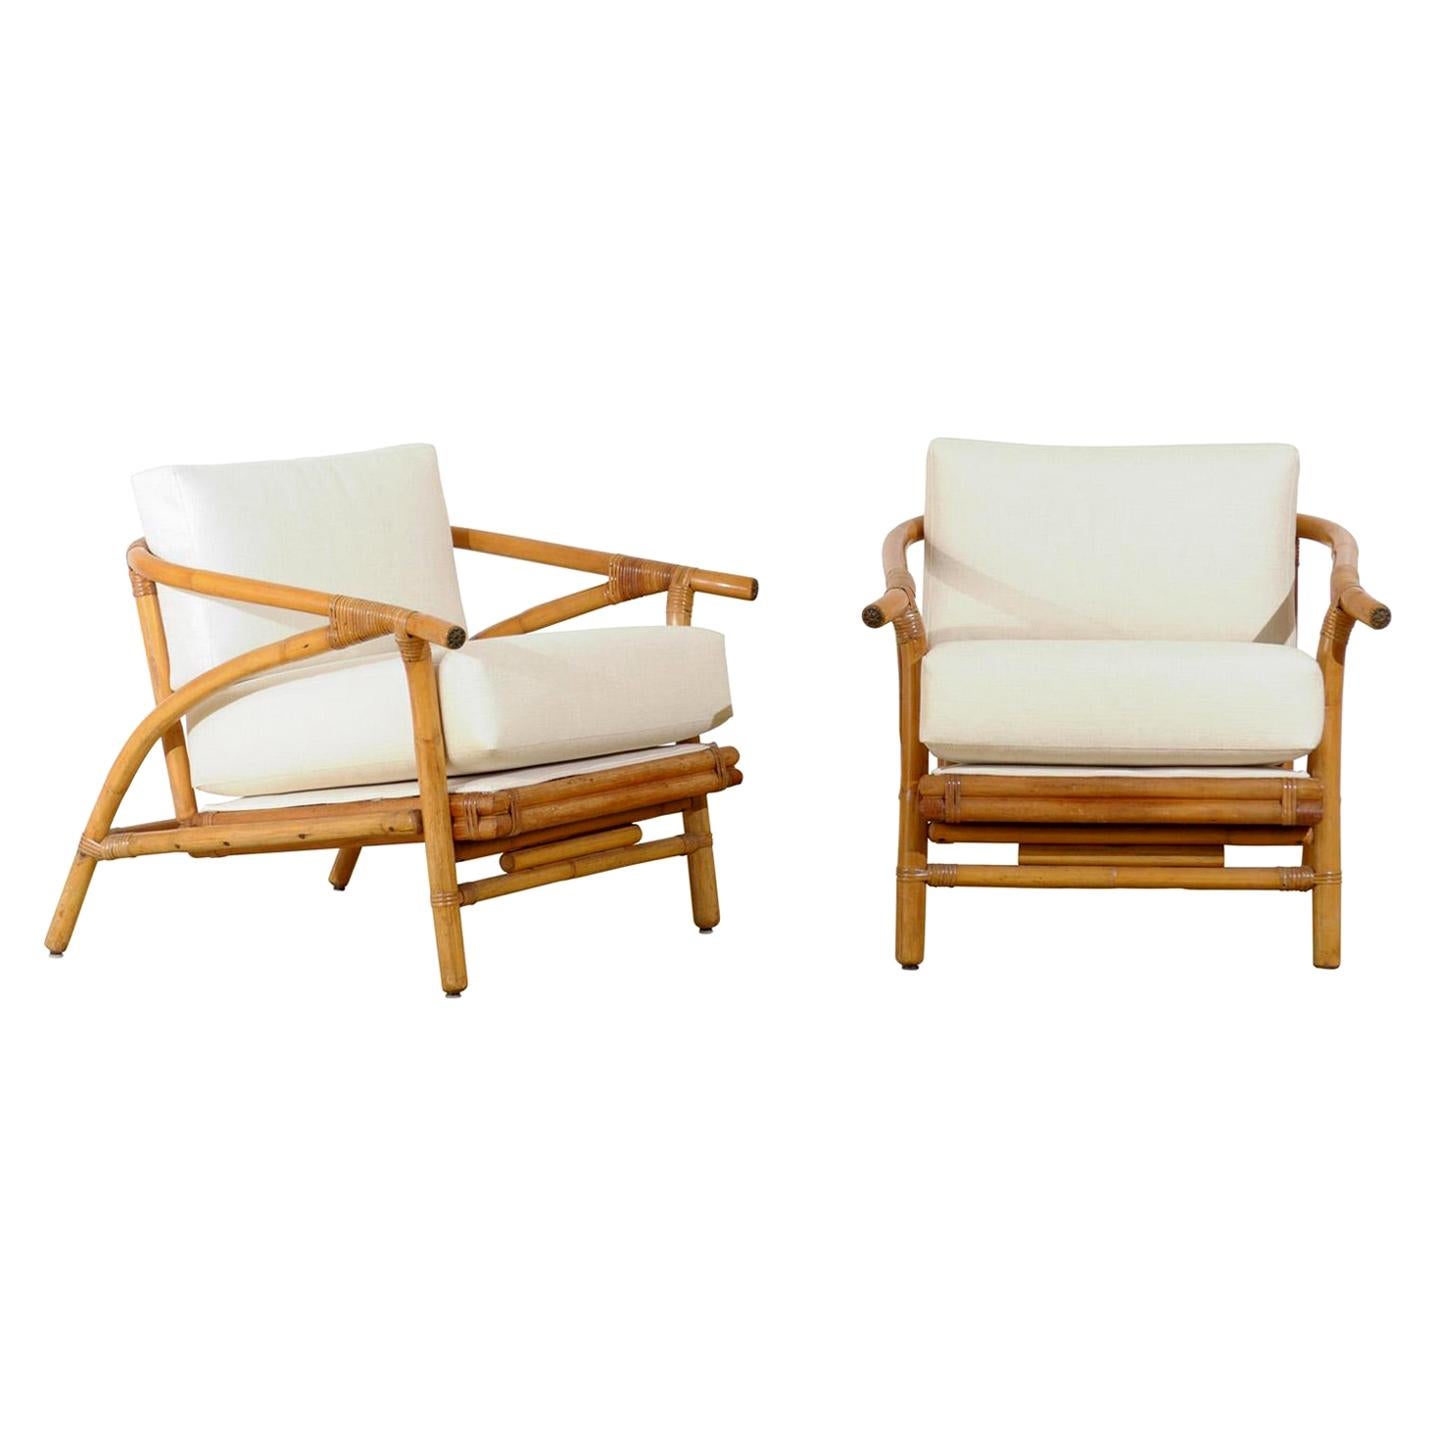 Install Ready Stylish Pair of Modern Loungers by Ficks Reed, circa 1965